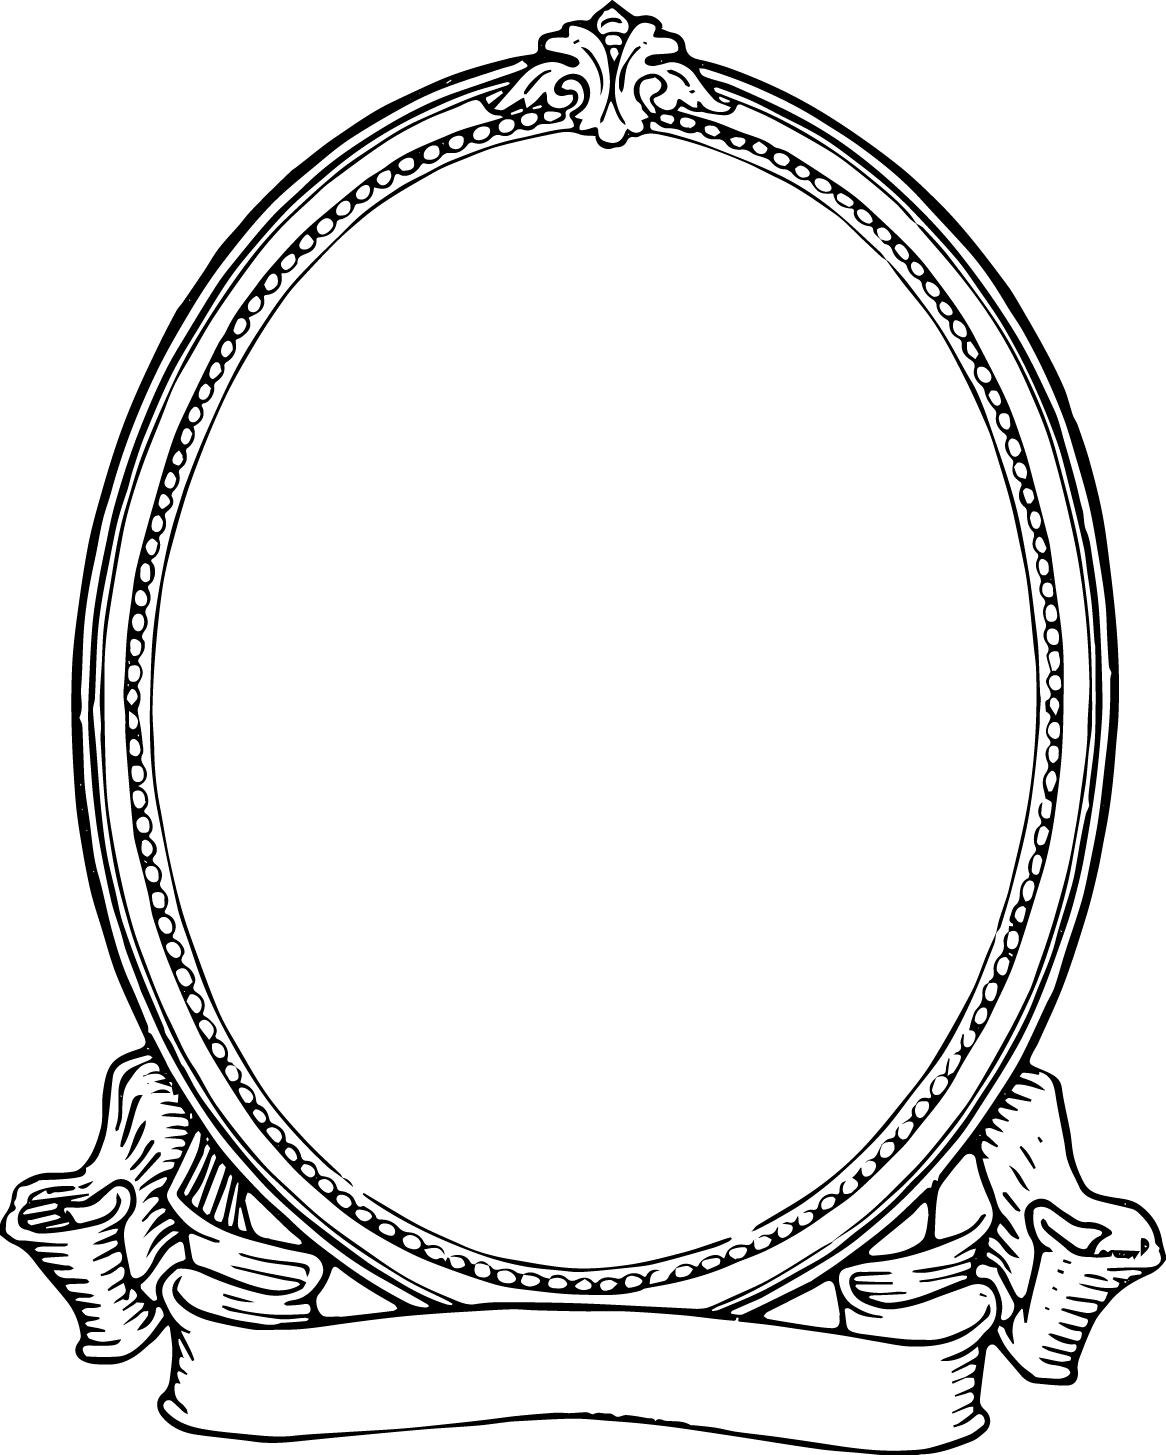 Free Clip Art - Vintage Photo Frame | Oh So Nifty Vintage Graphics ...